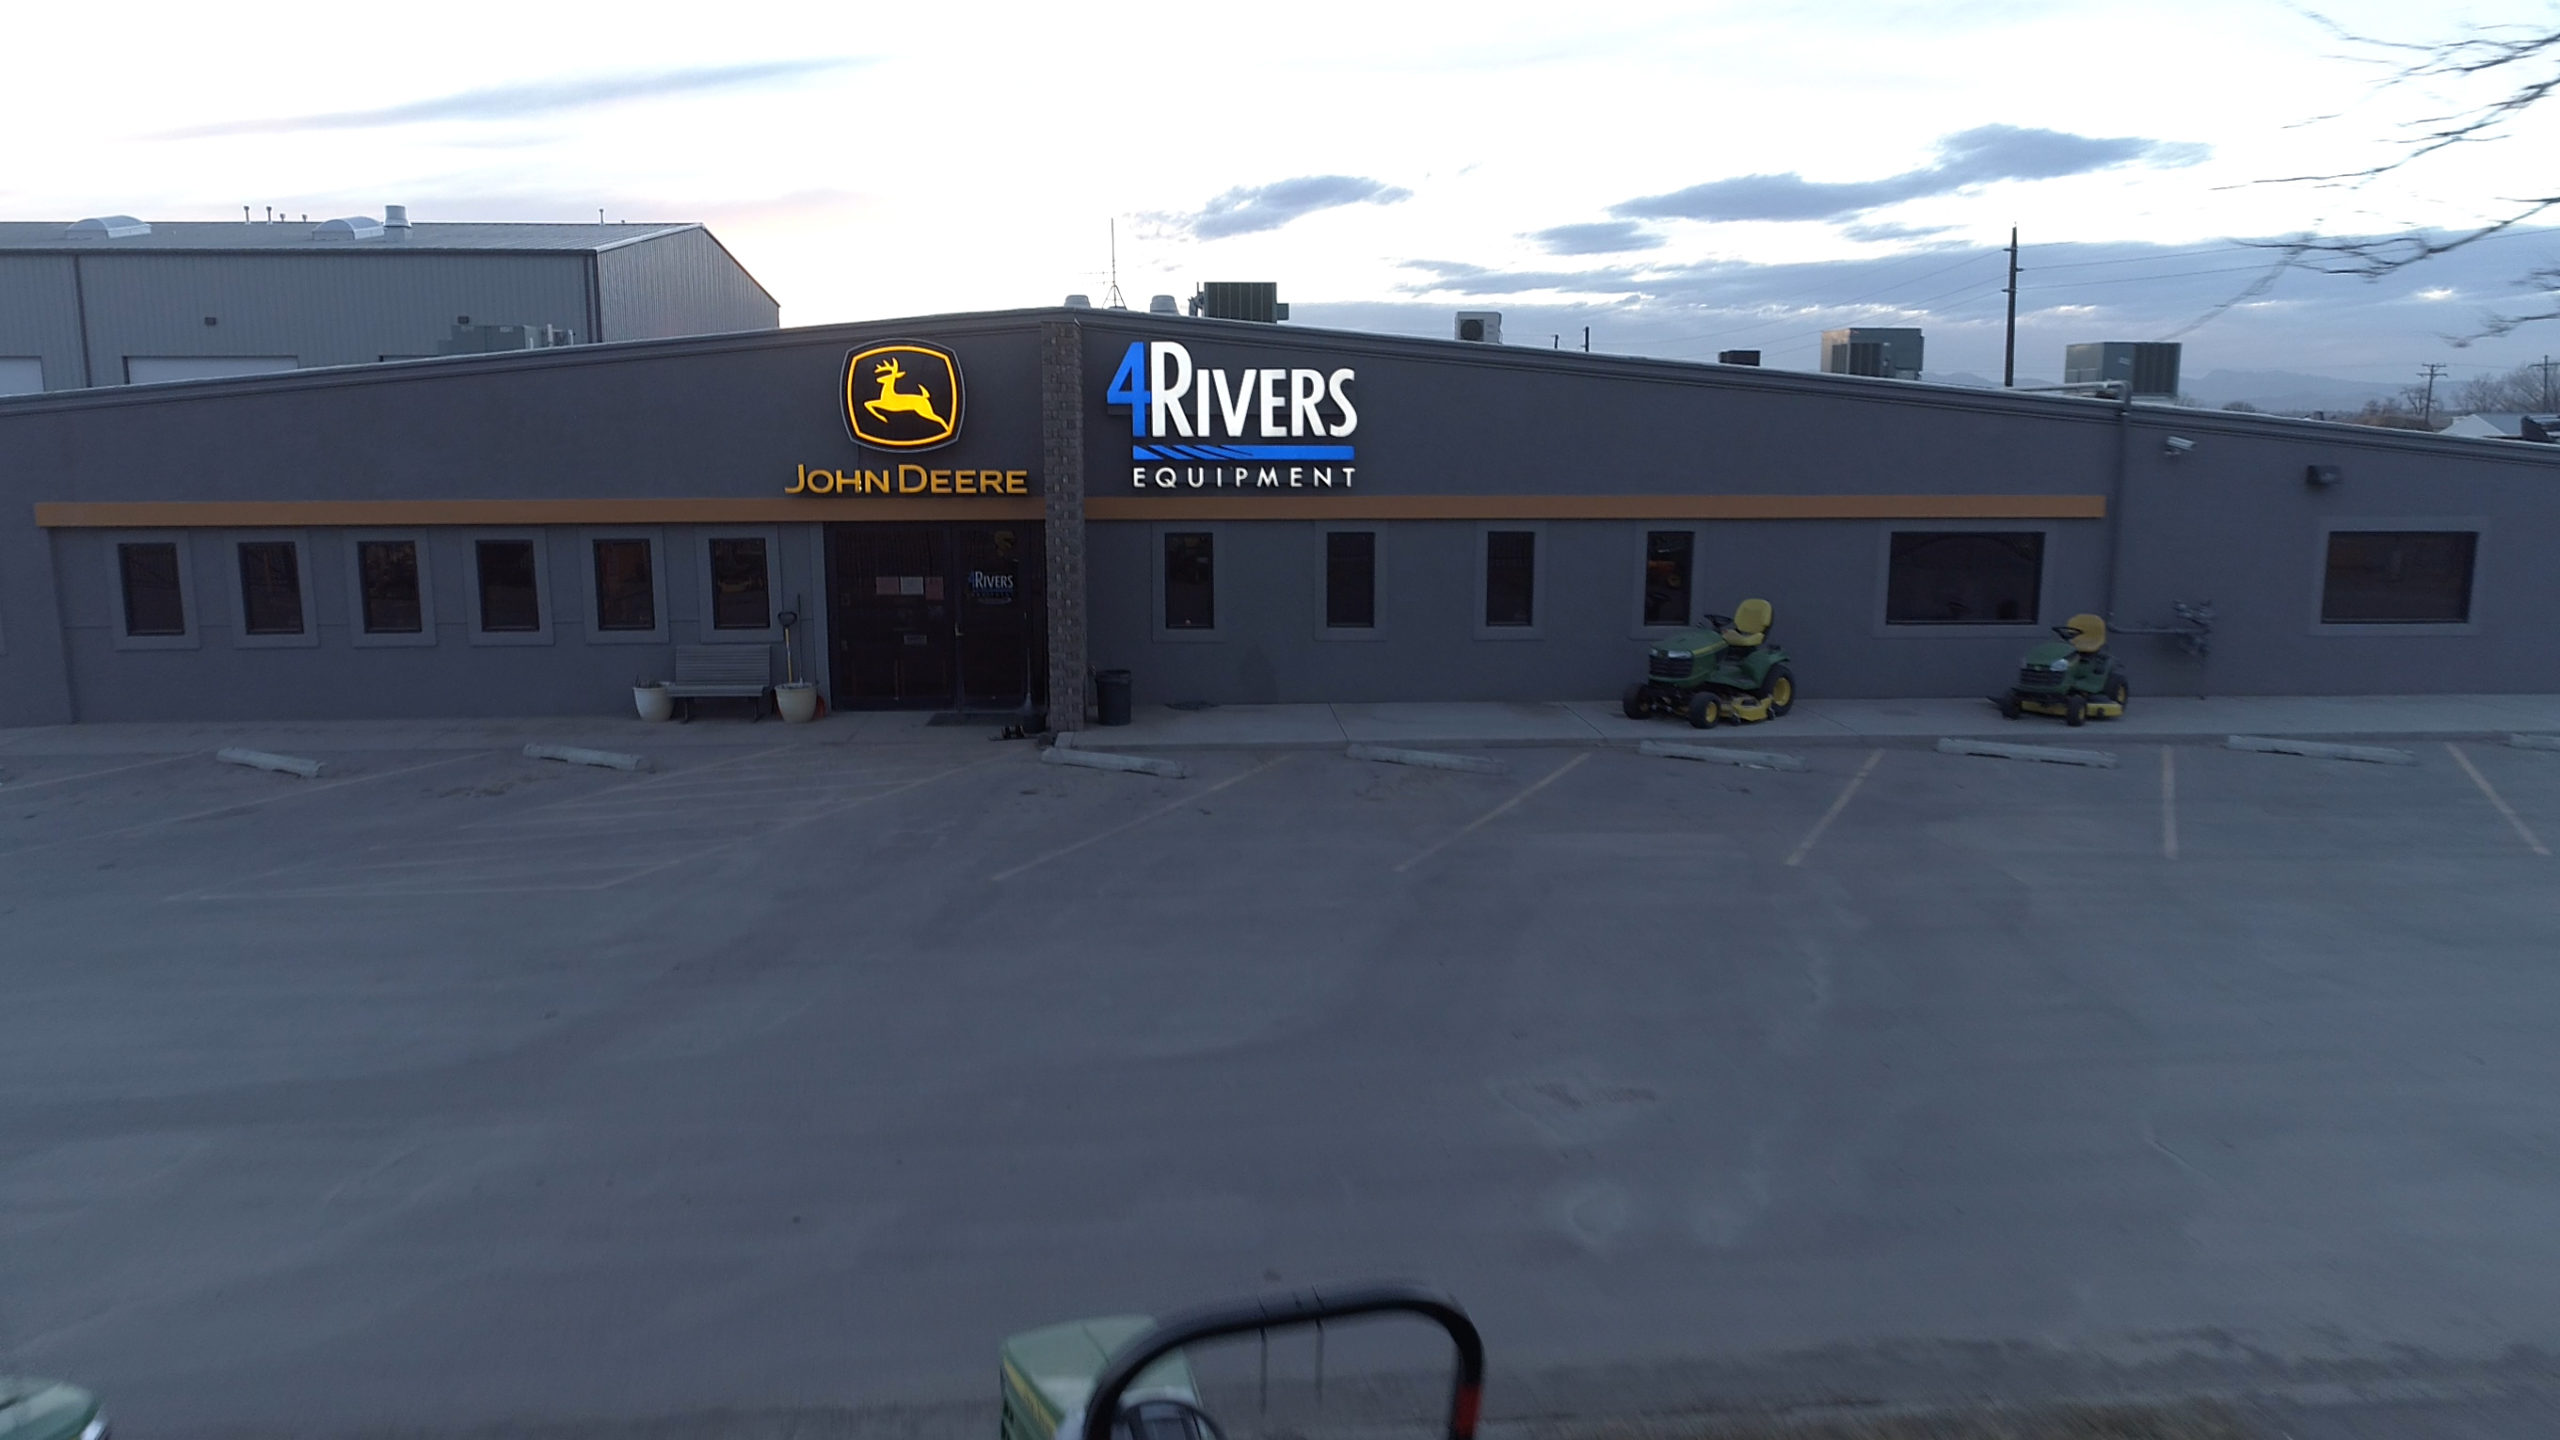 Our 4Rivers Equipment Fort Collins location provides industry-leading John Deere equipment support and service.